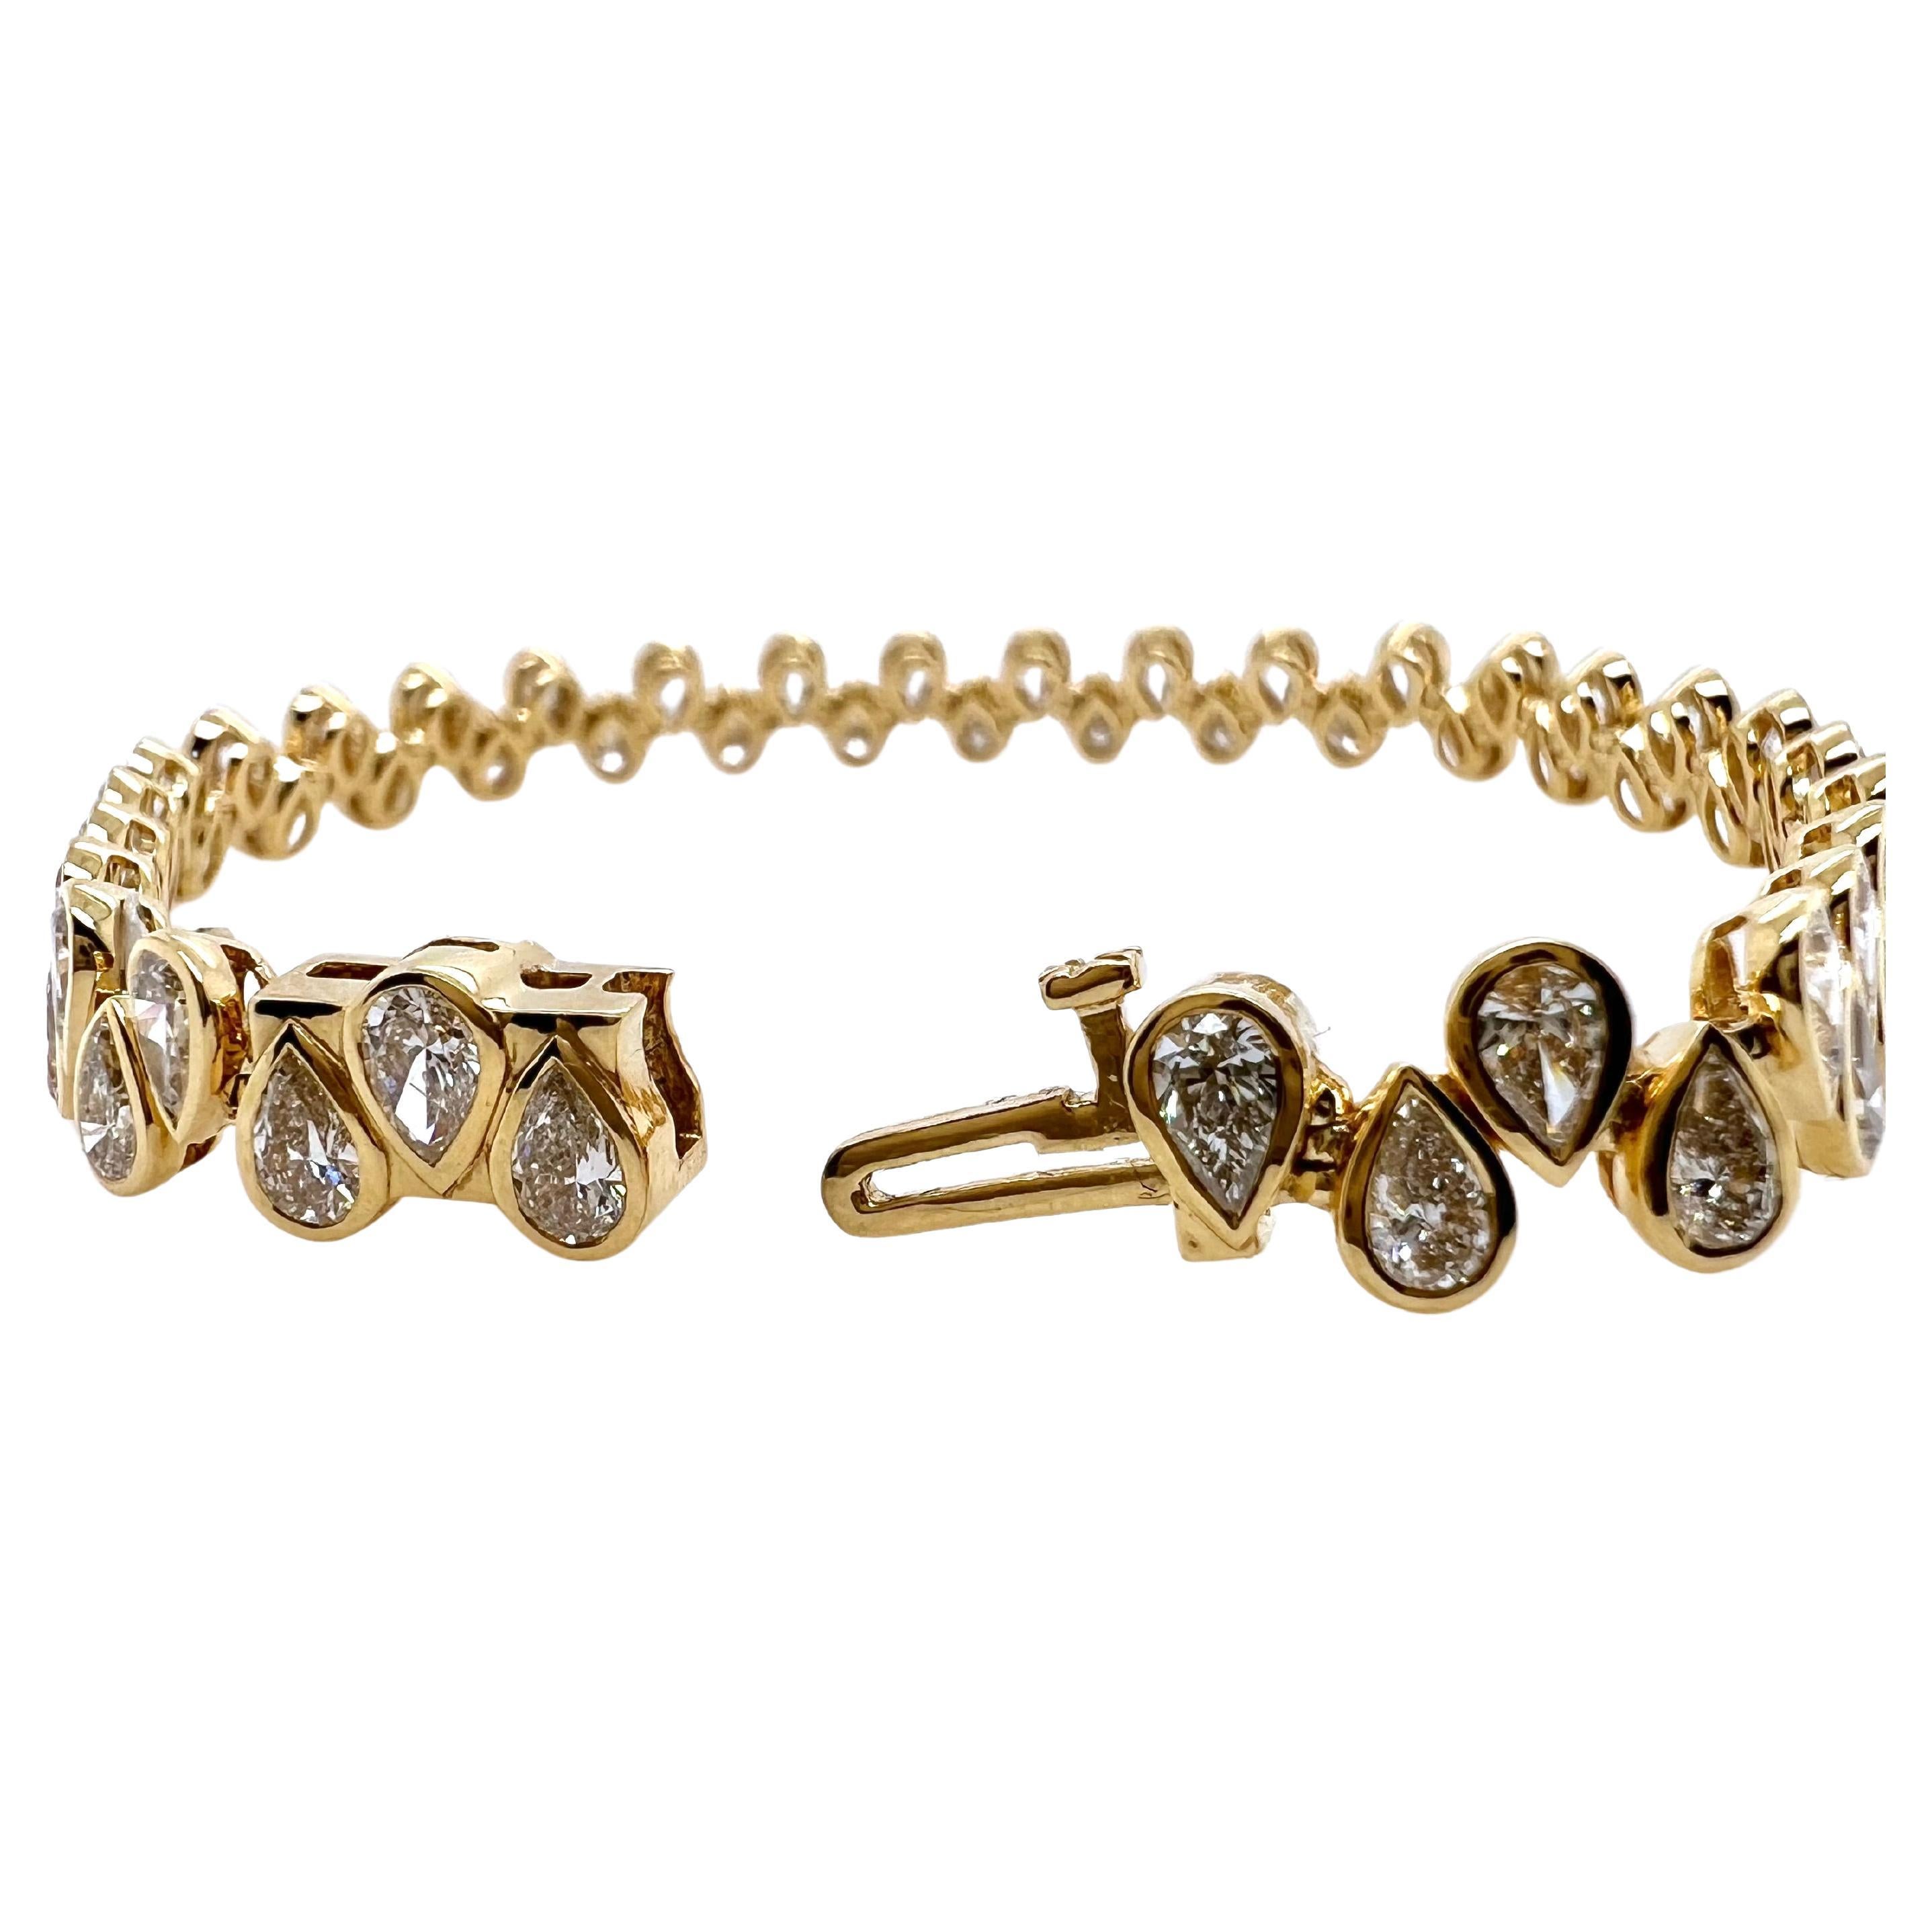 This gorgeous tennis bracelet will be the talk of the town!  The alternating pear shape pattern is unique and
contemporary.  The pear shape diamonds are bezel set in 18k yellow gold with no prongs protruding up.  This
enables you to wear the